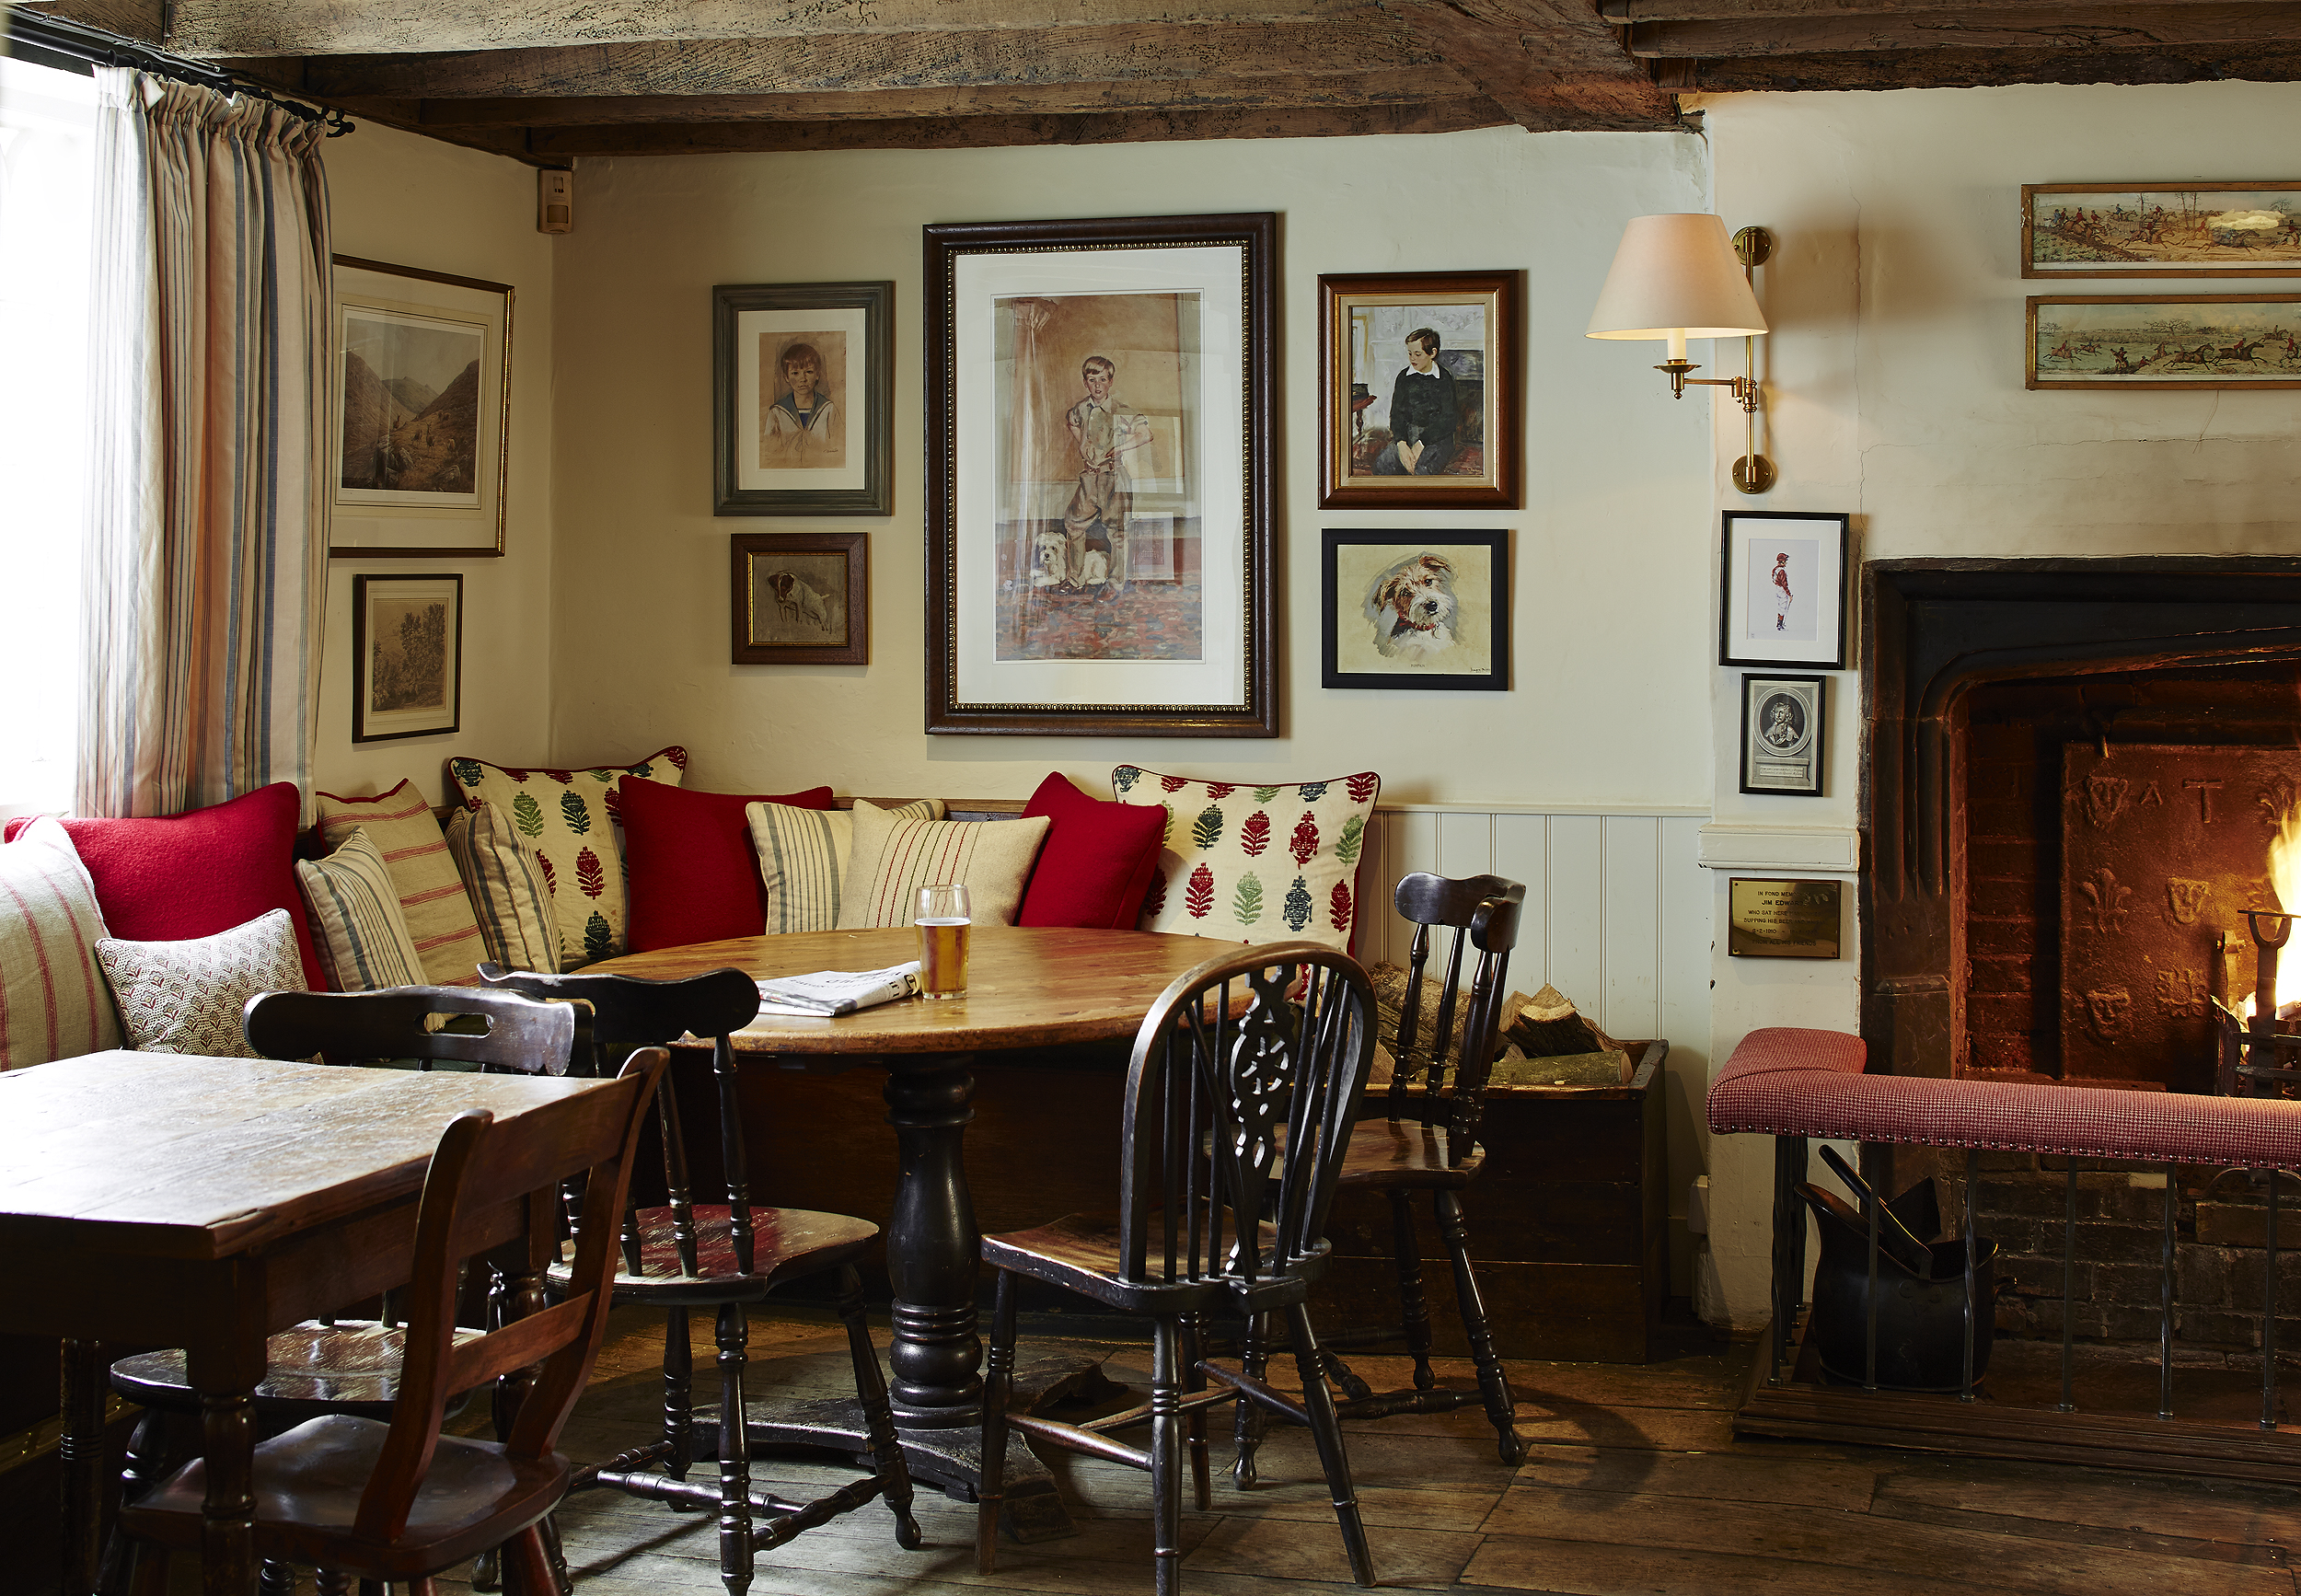 The Dorset Arms, Sussex, UK.  Interior photography by Mike Caldwell